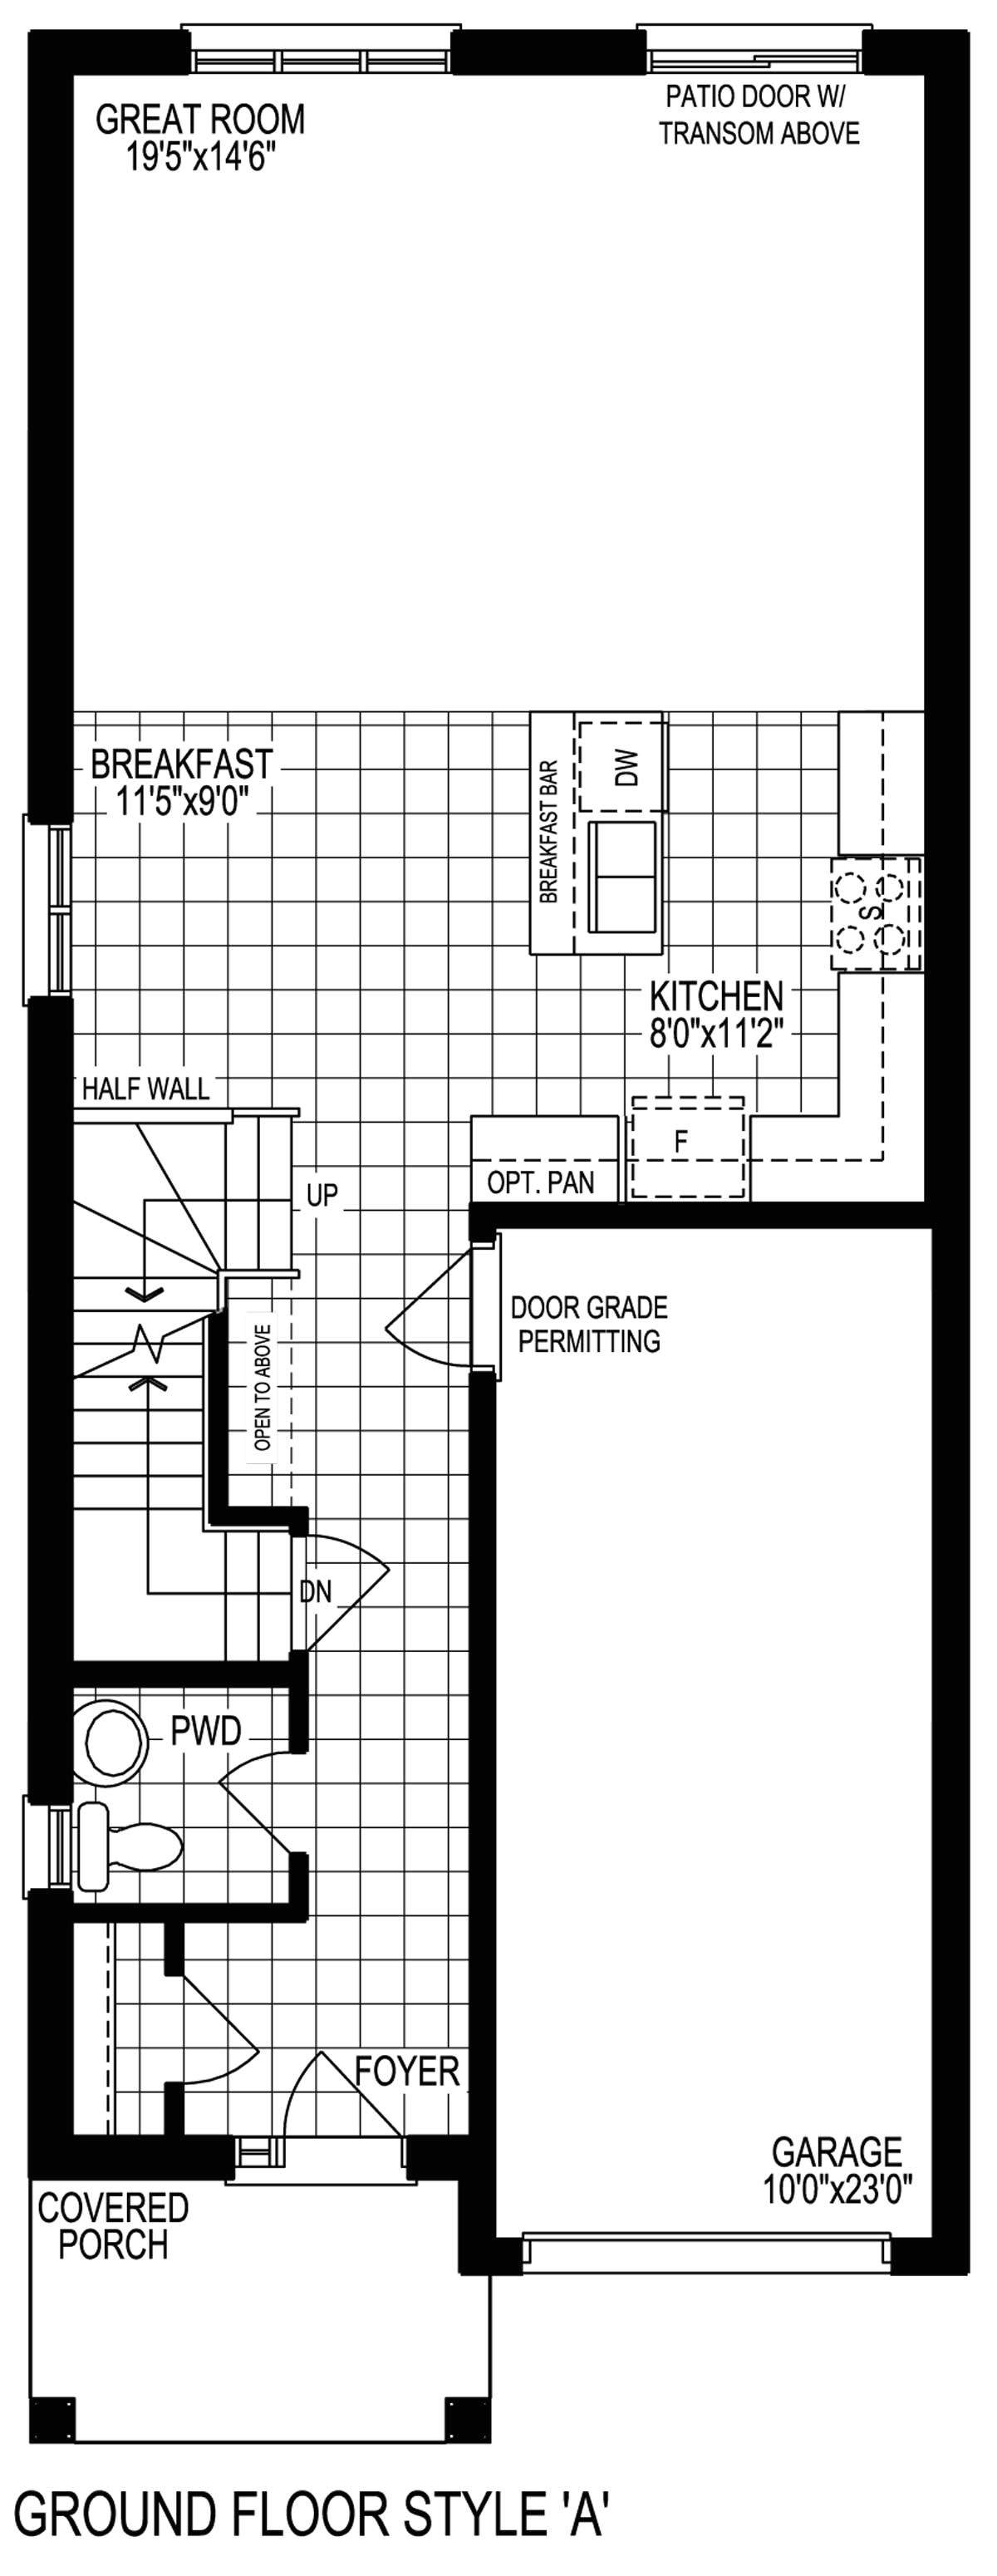 Melody Homes Floor Plan Melody Homes Brooklin Floor Plans Home Design and Style